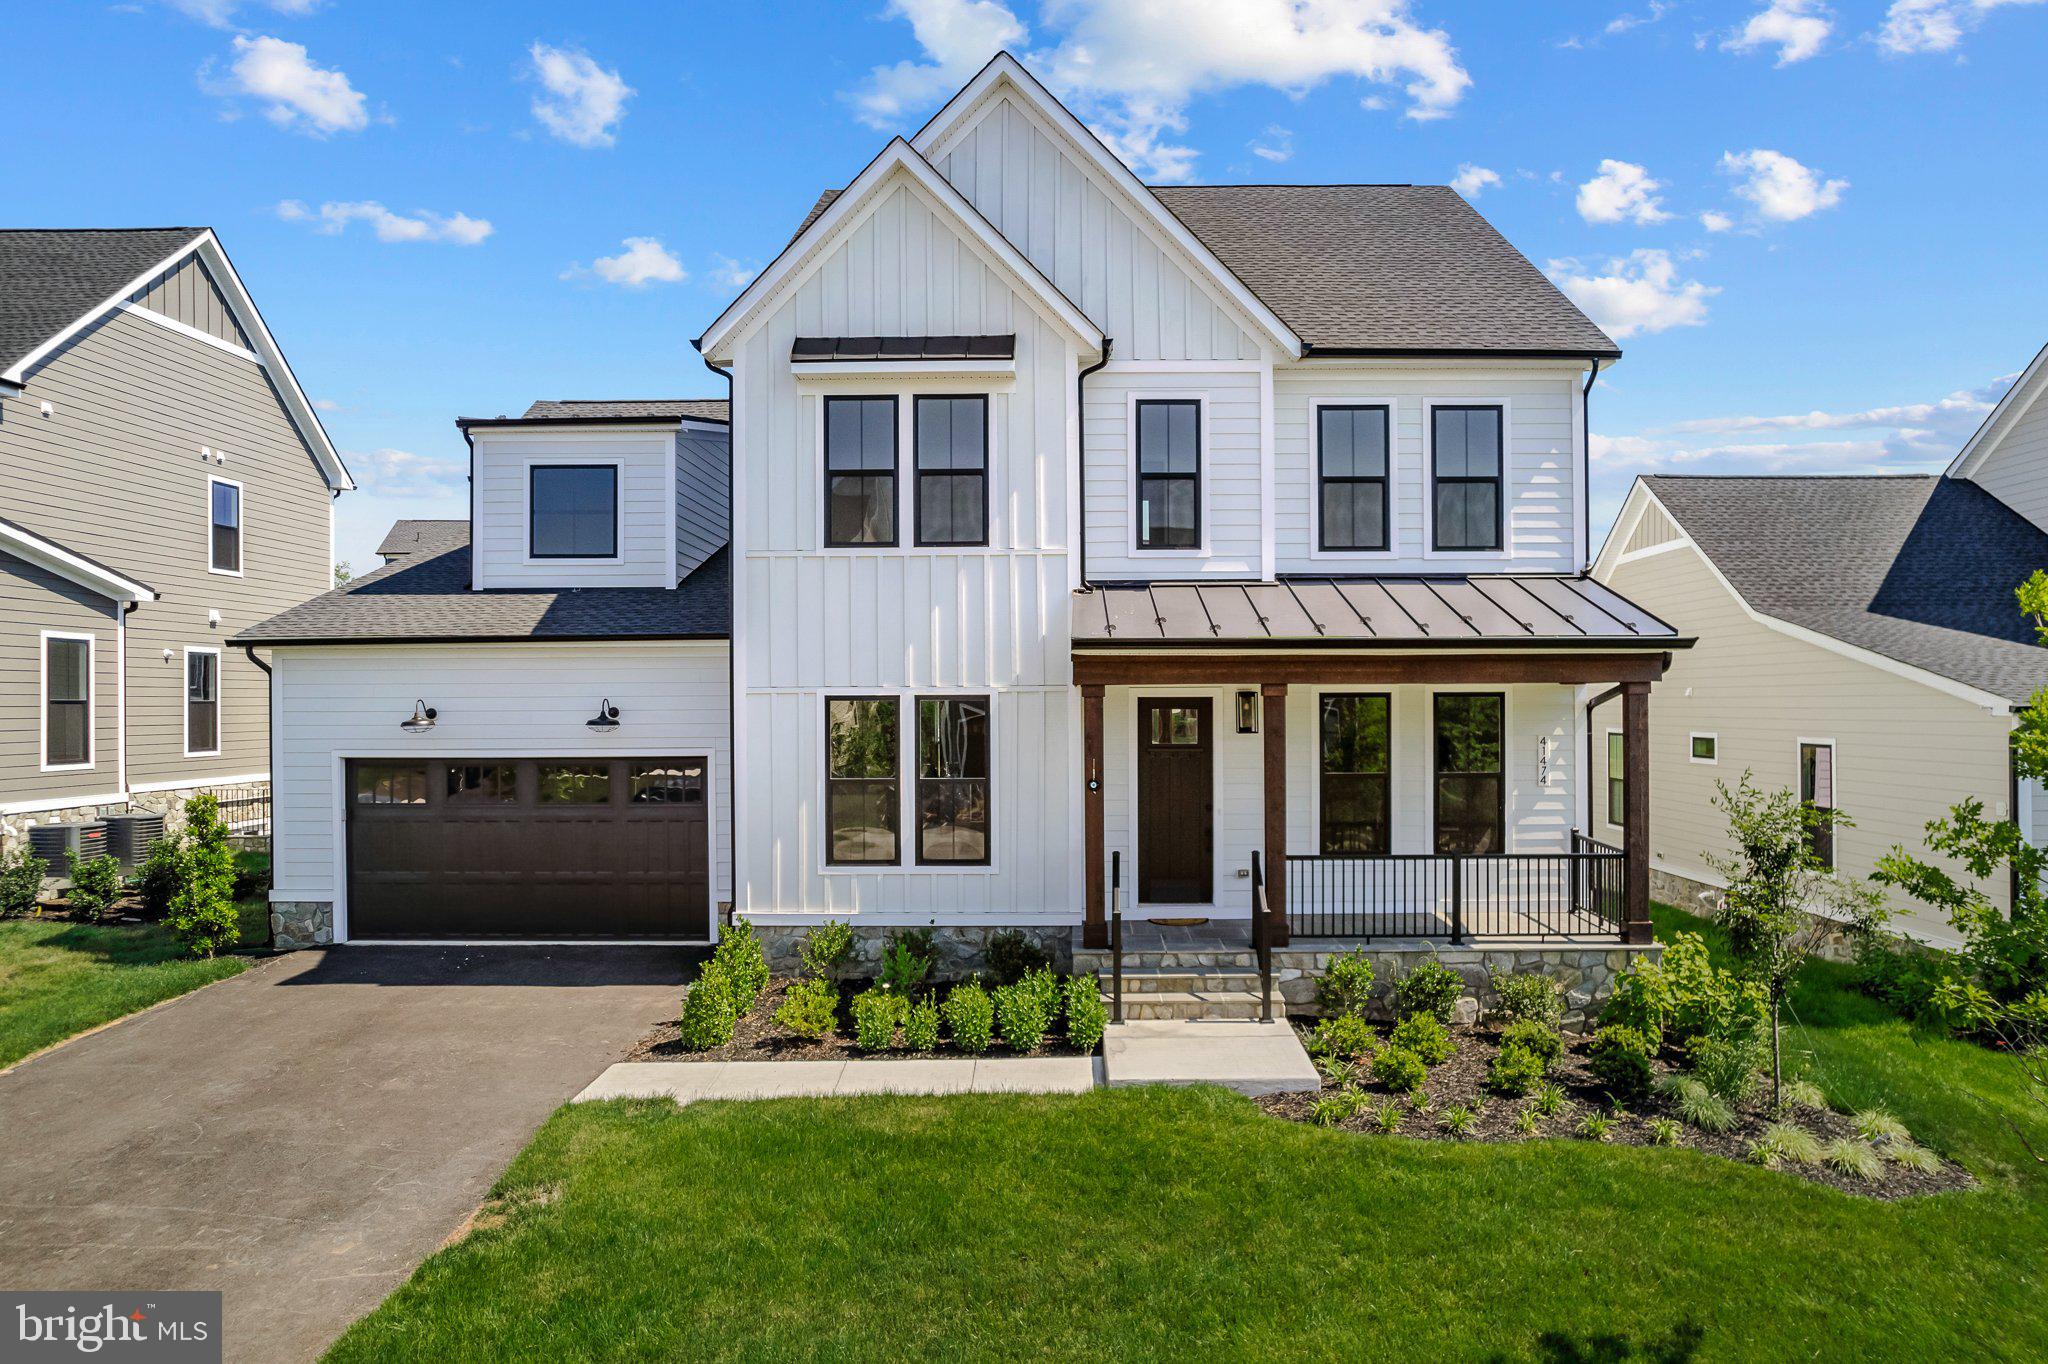 Come see this Gorgeous 5 bedroom, 4.5 bath Single Family in Hartland, only a little over a year old,